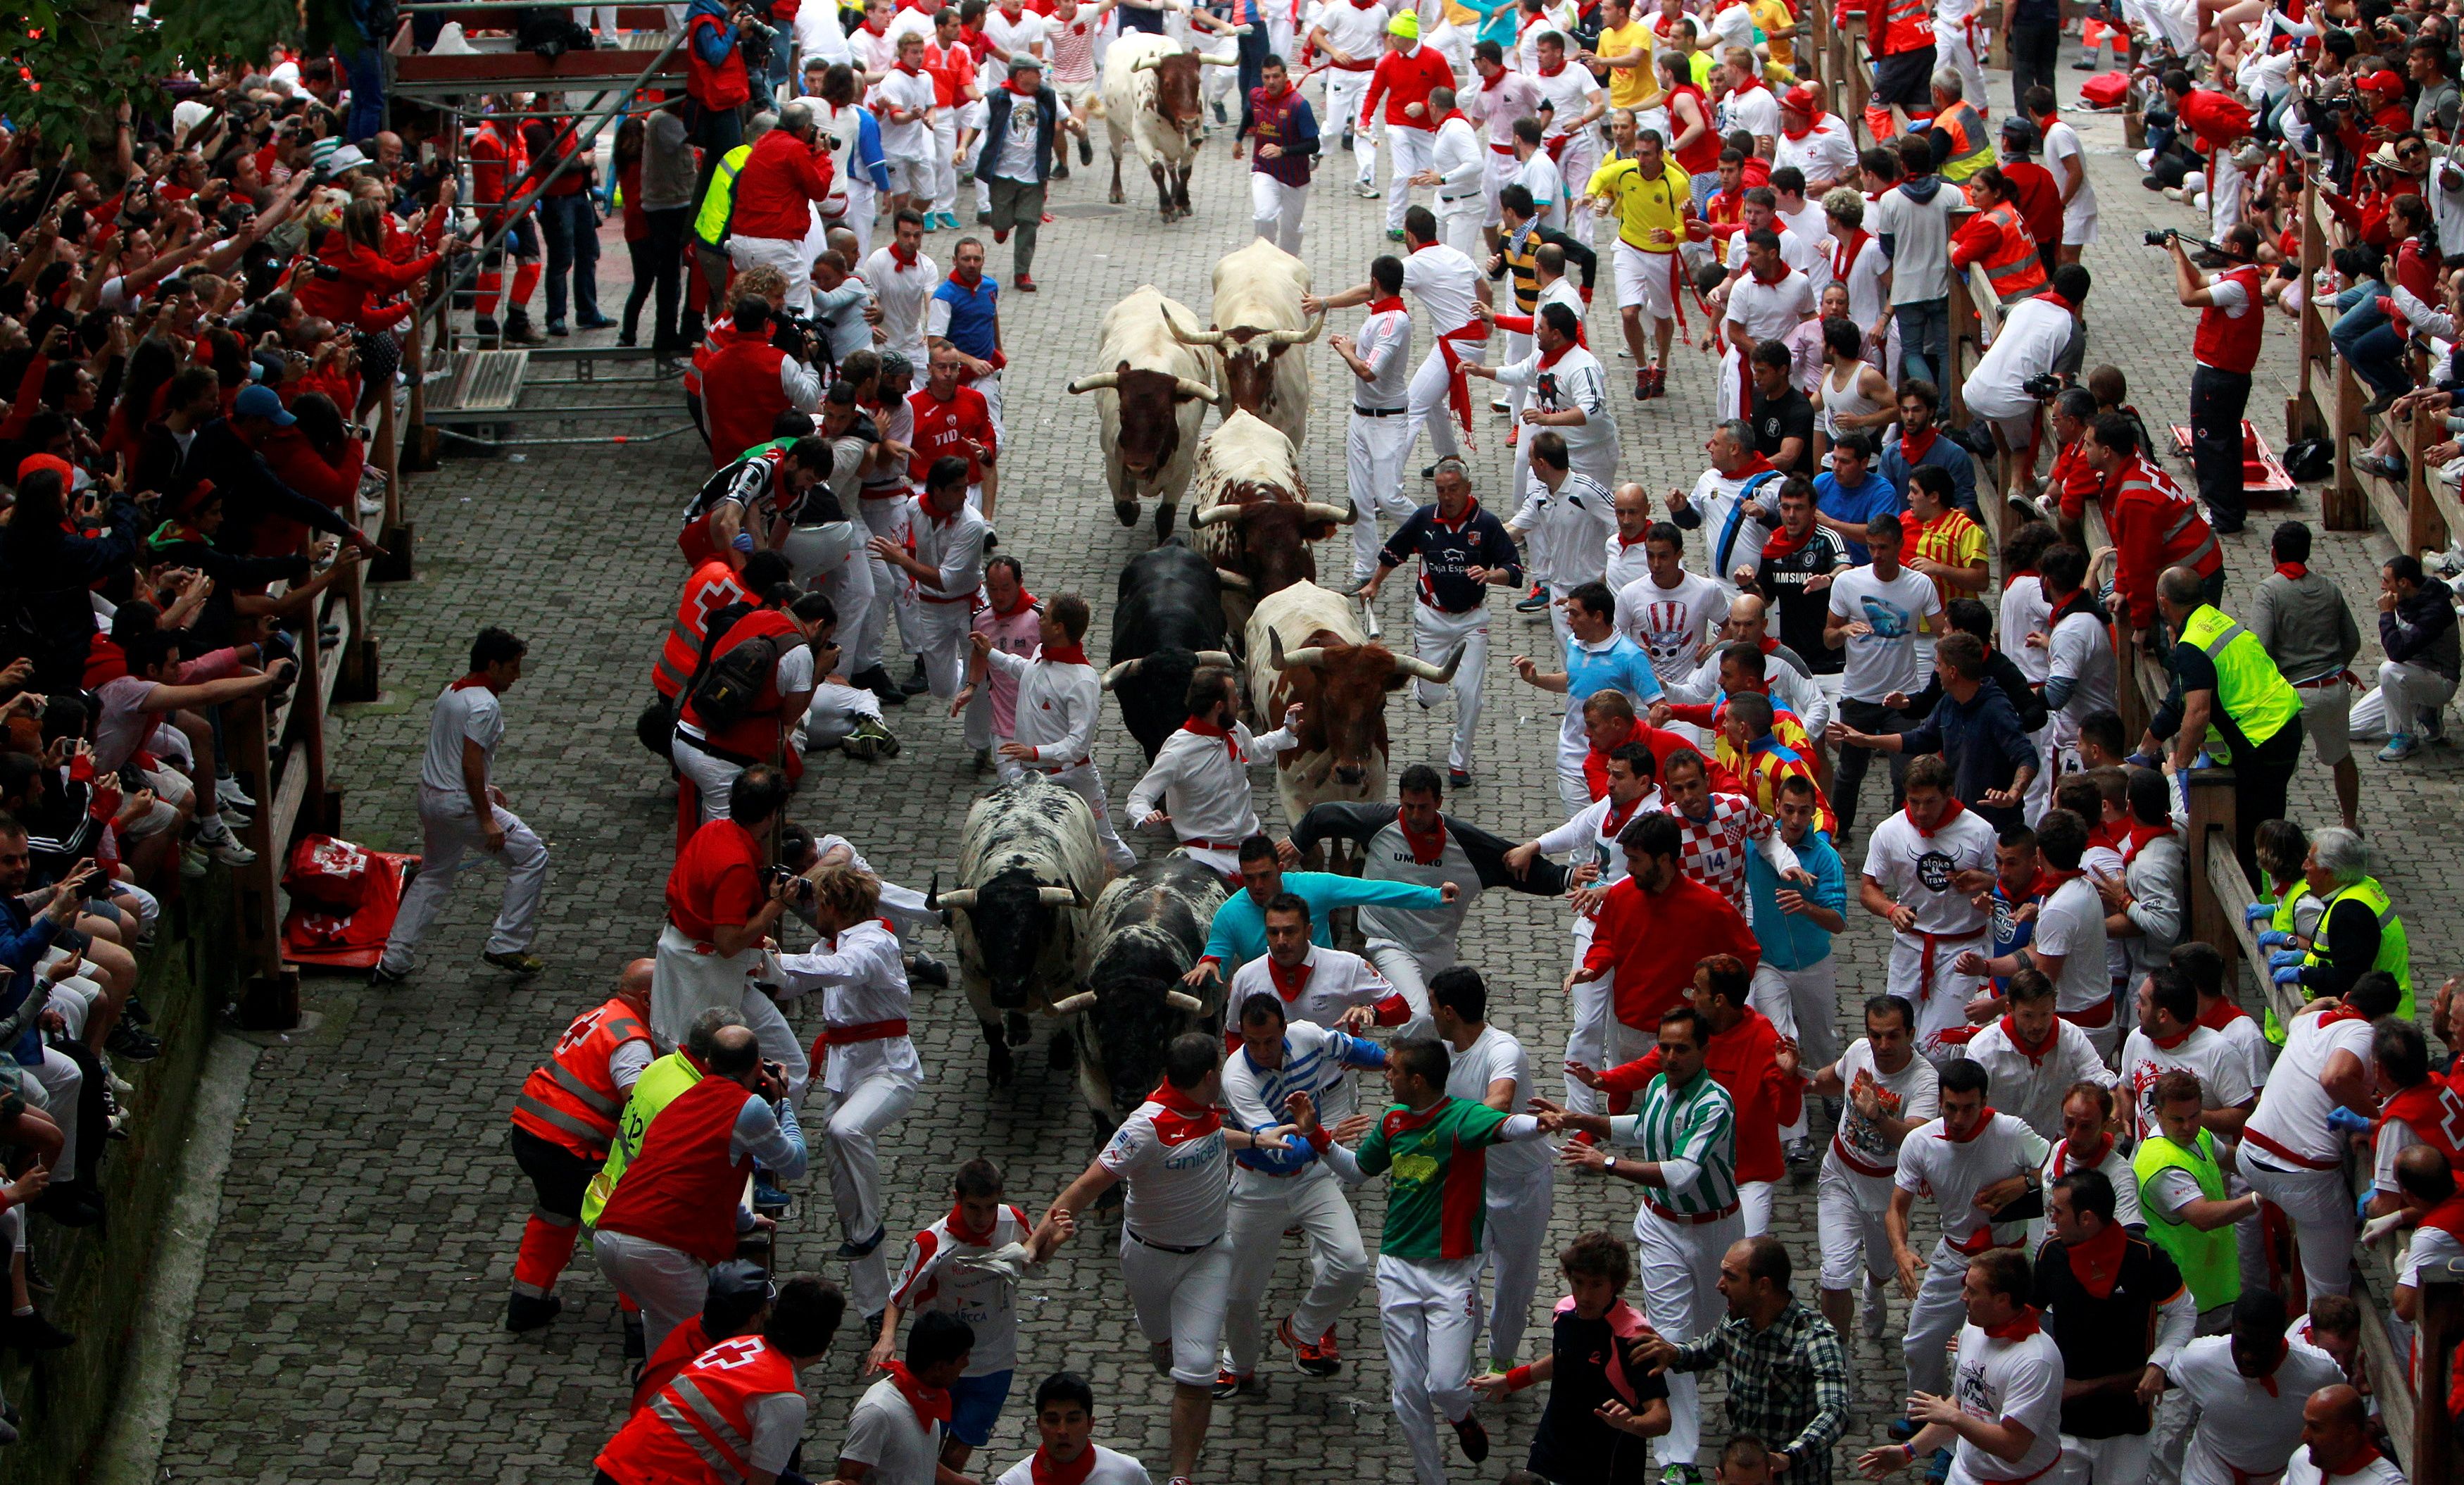 Runners sprint in front of Torrestrella fighting bulls at the entrance to the bullring during the first running of the bulls of the San Fermin festival in Pamplona